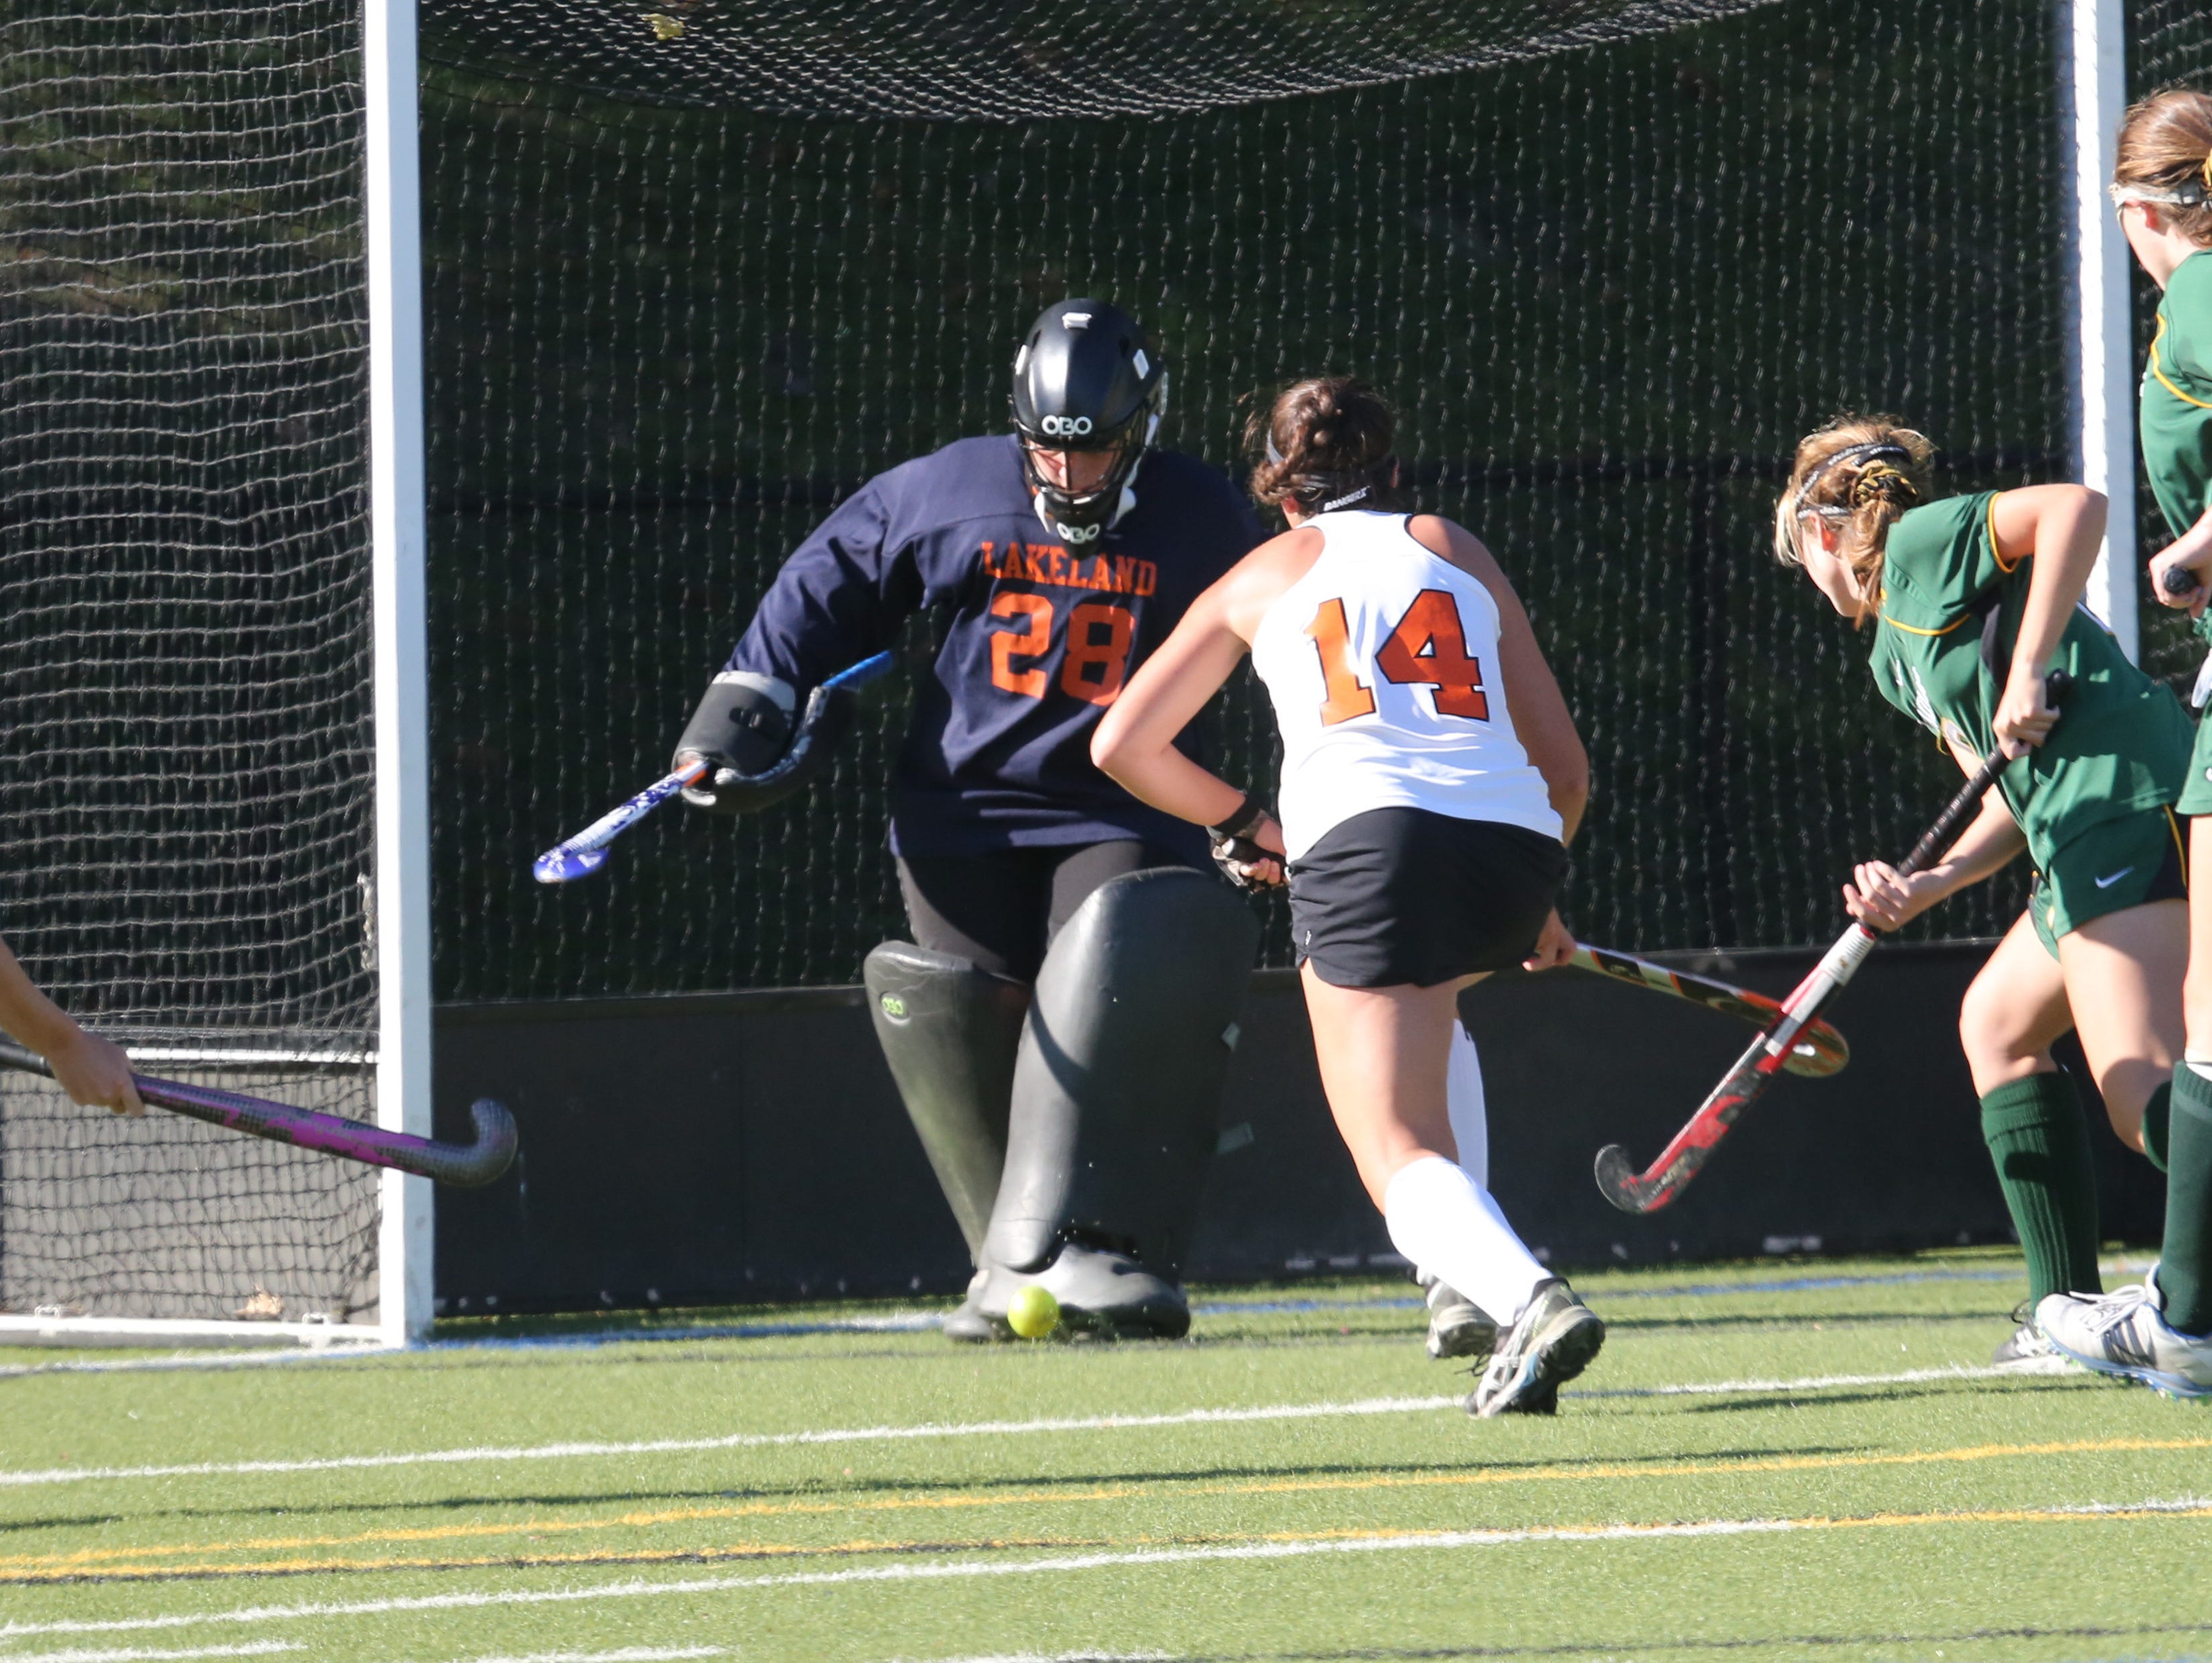 Lakeland goalie Cassie Halpin blocks a shot with Mamaroneck's Sophie Brill bearing down on her during their game at Mamaroneck High School on Saturday.